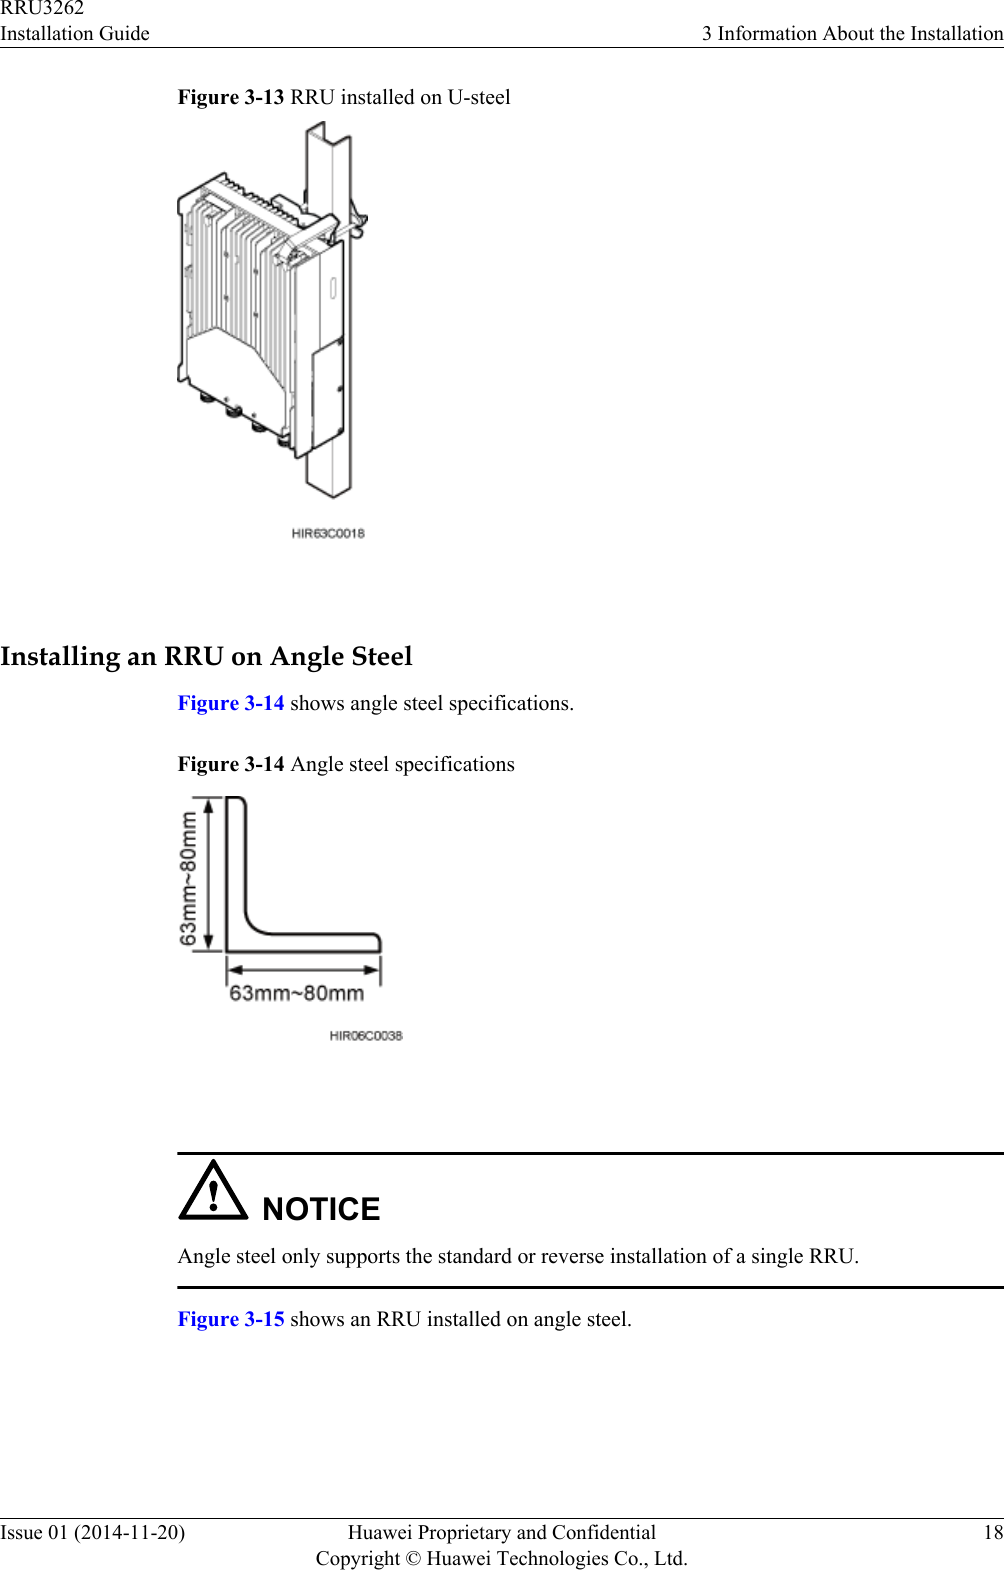 Figure 3-13 RRU installed on U-steel Installing an RRU on Angle SteelFigure 3-14 shows angle steel specifications.Figure 3-14 Angle steel specifications NOTICEAngle steel only supports the standard or reverse installation of a single RRU.Figure 3-15 shows an RRU installed on angle steel.RRU3262Installation Guide 3 Information About the InstallationIssue 01 (2014-11-20) Huawei Proprietary and ConfidentialCopyright © Huawei Technologies Co., Ltd.18